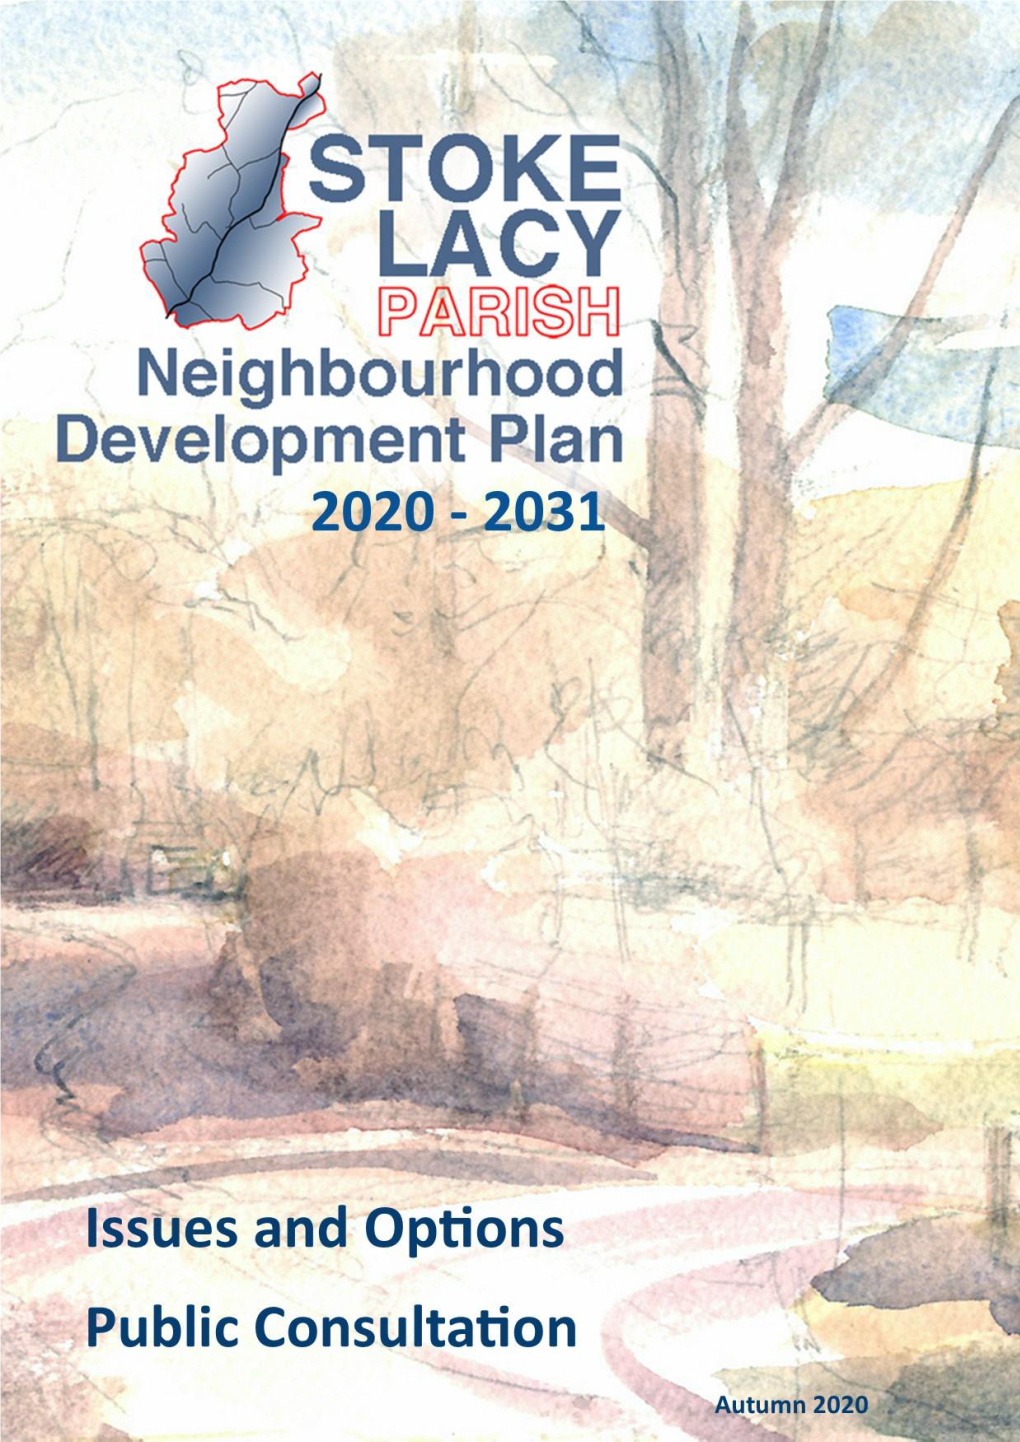 Stoke Lacy Parish NDP - Issues and Options V3.4LK 13102020